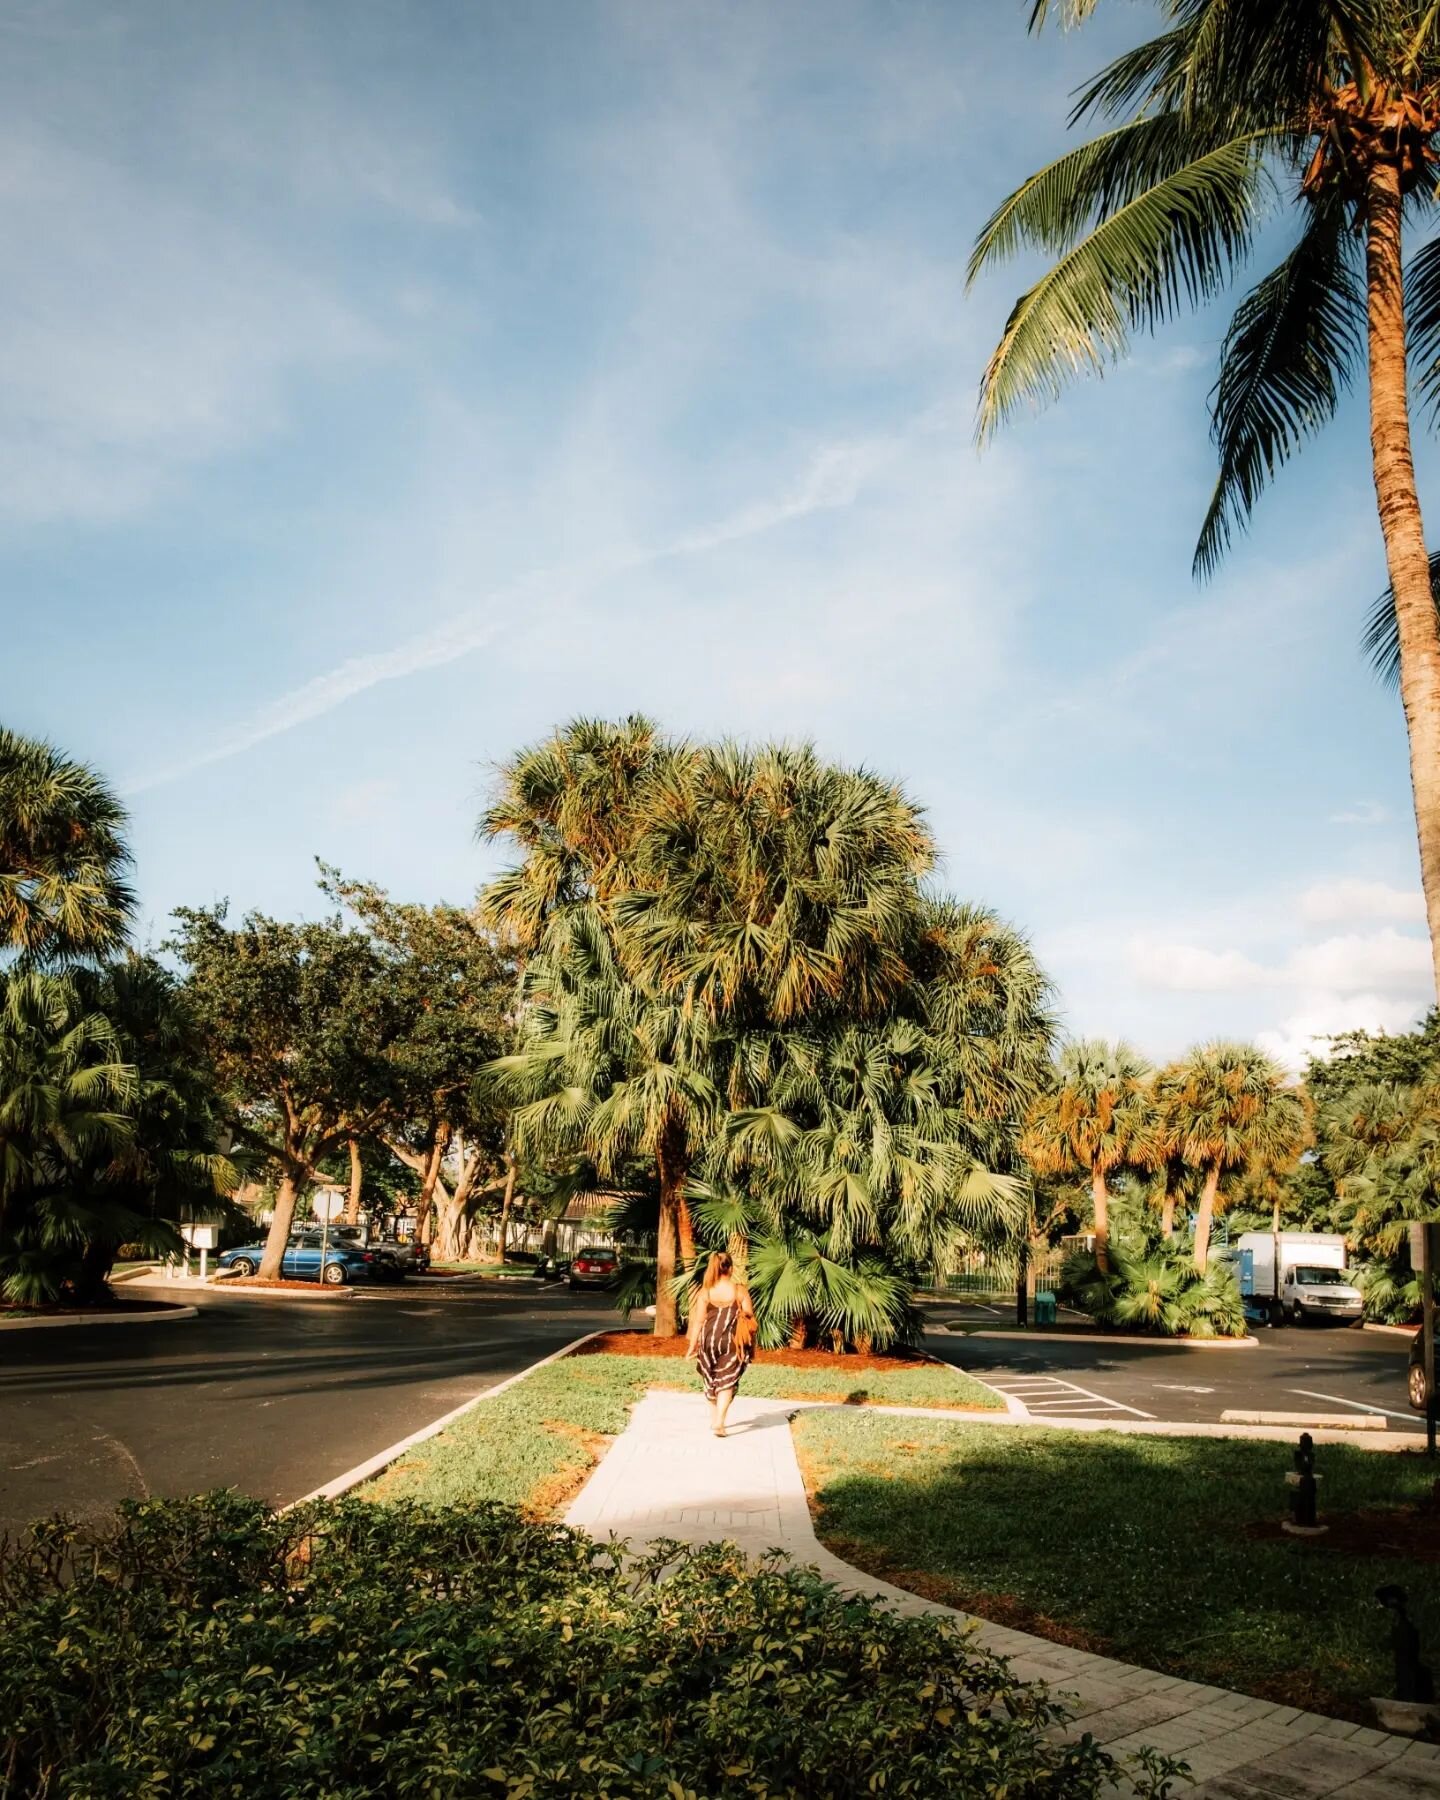 Palm Trees for shade.

Not that I subscribe to the always hustle culture but travel is the success I have to hustle for.

#travel #palmtrees #florida #photographer #travelphotography #hustlequotes